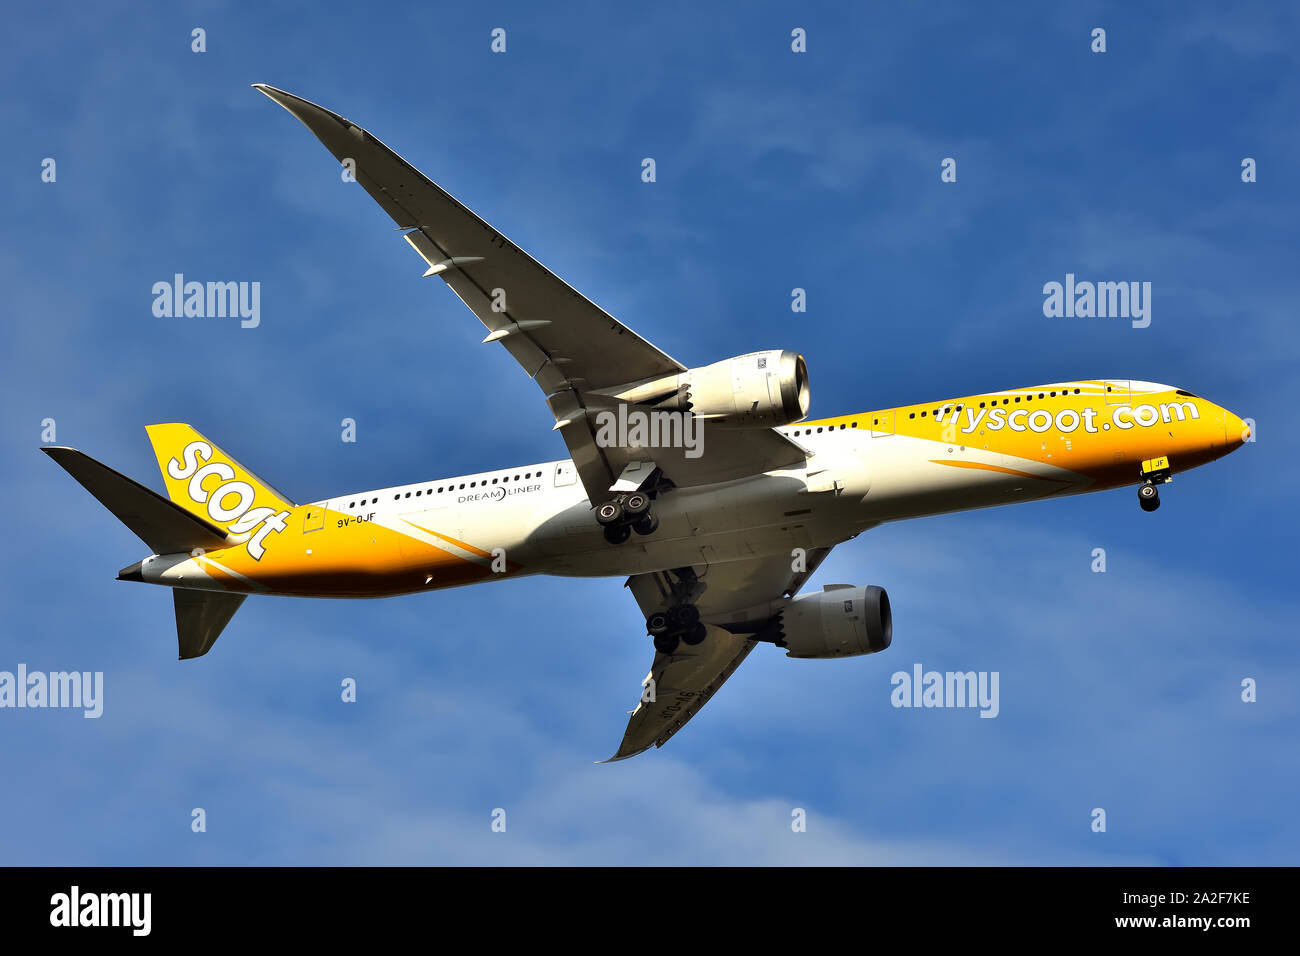 Boeing 787-9 Dreamliner 9V-OJF of Scoot Airlines, on approach to Perth Airport, Western Australia Stock Photo